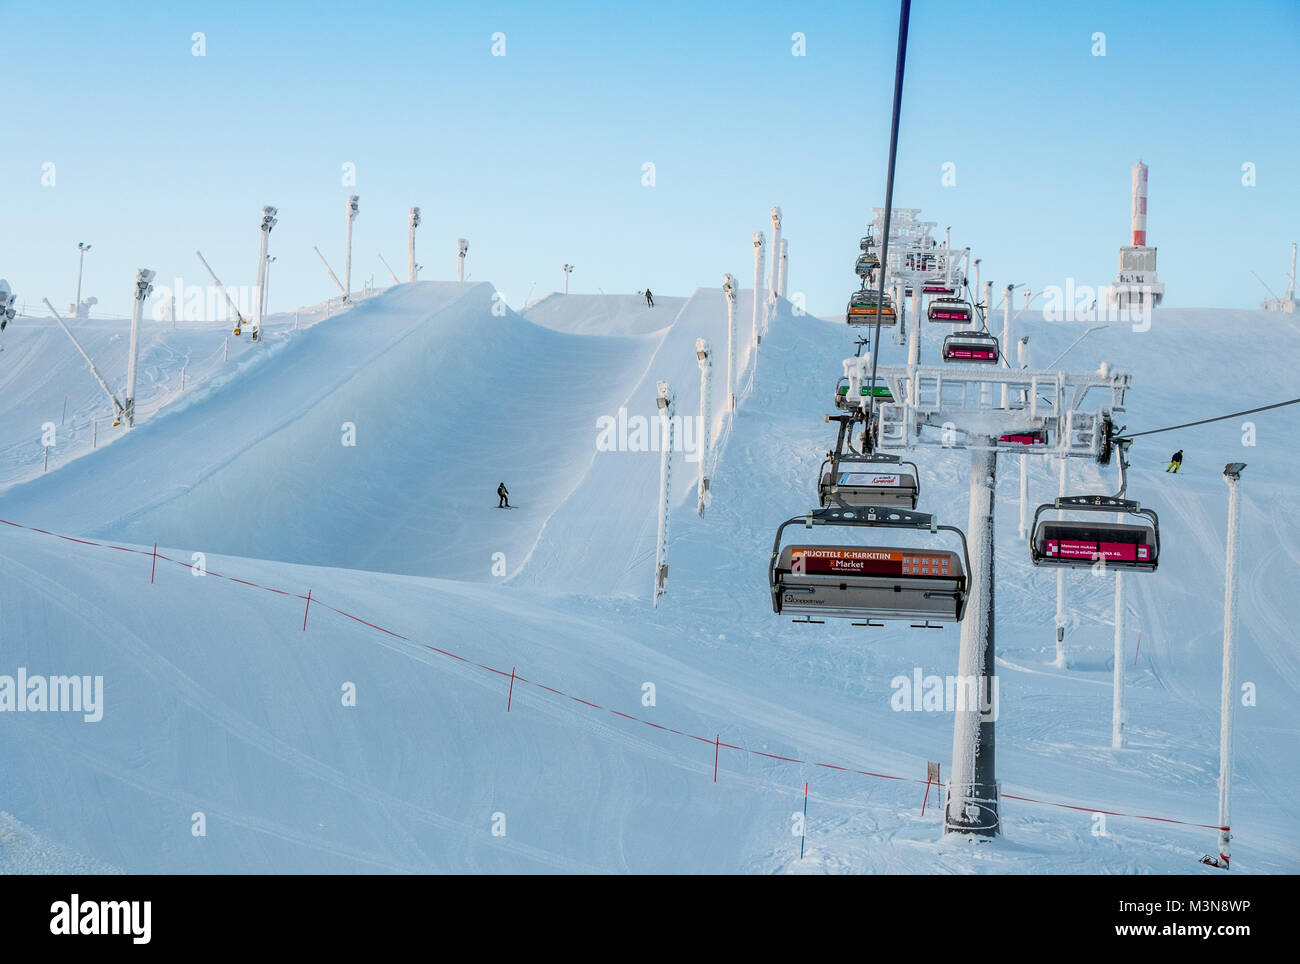 Chairlifts at The ski resort of Ruka in Finland Stock Photo